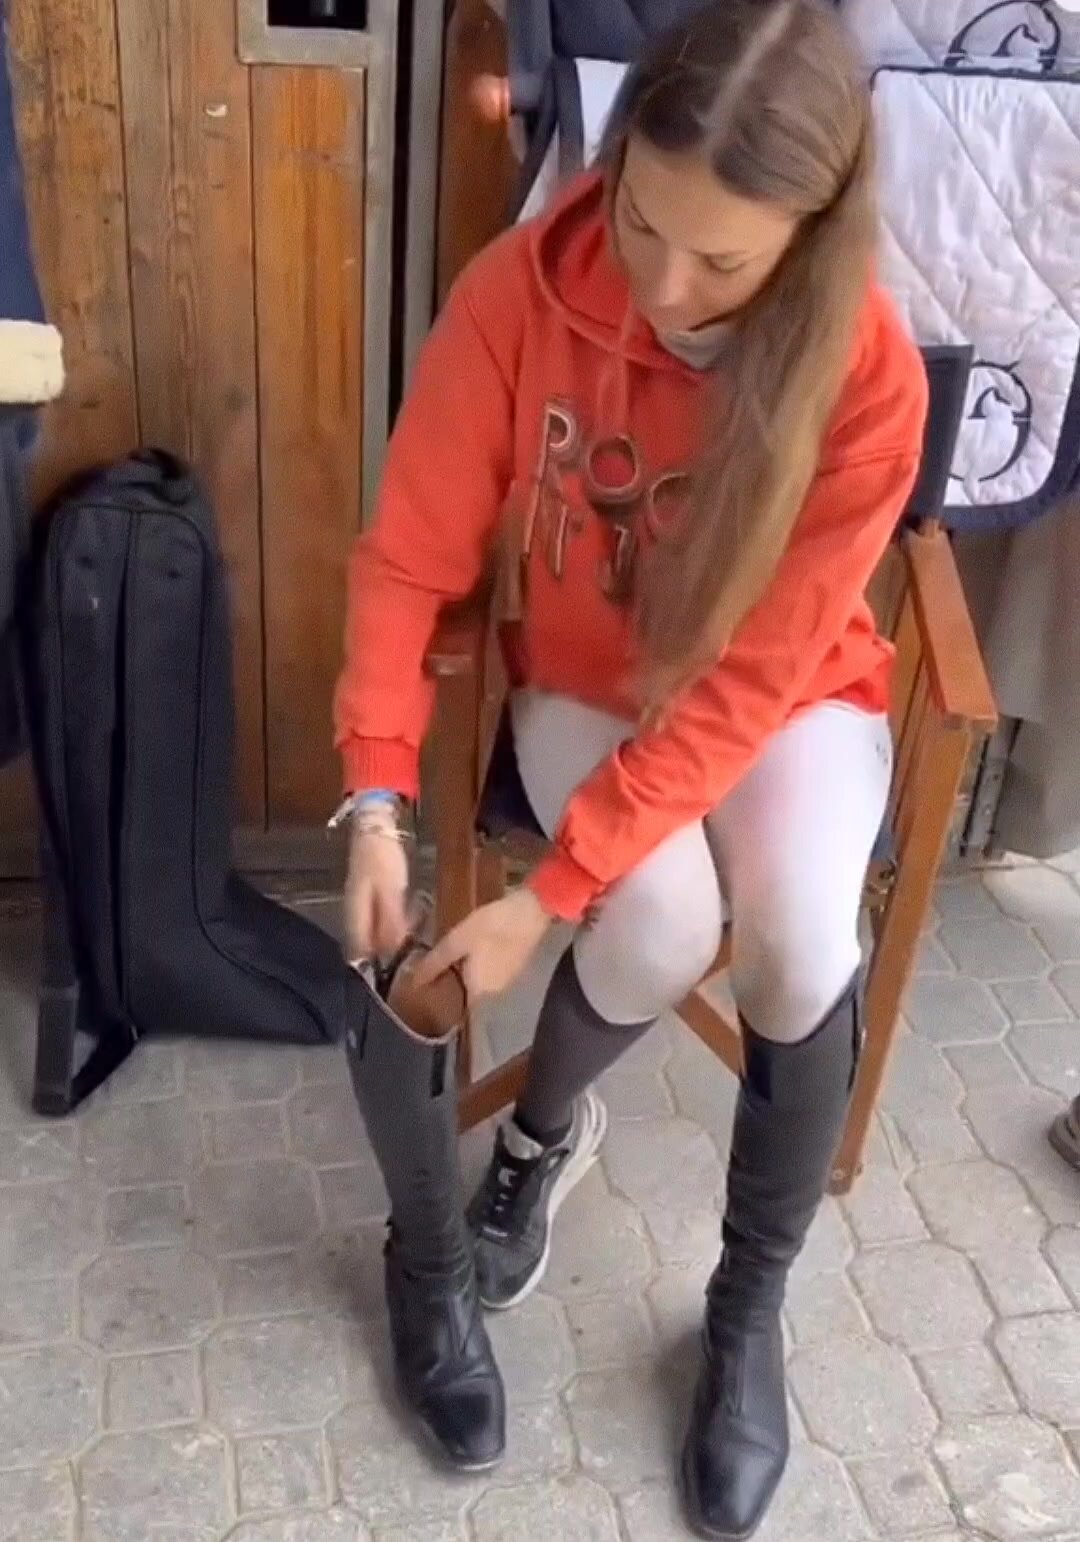 A sexy rider puts on her riding boots